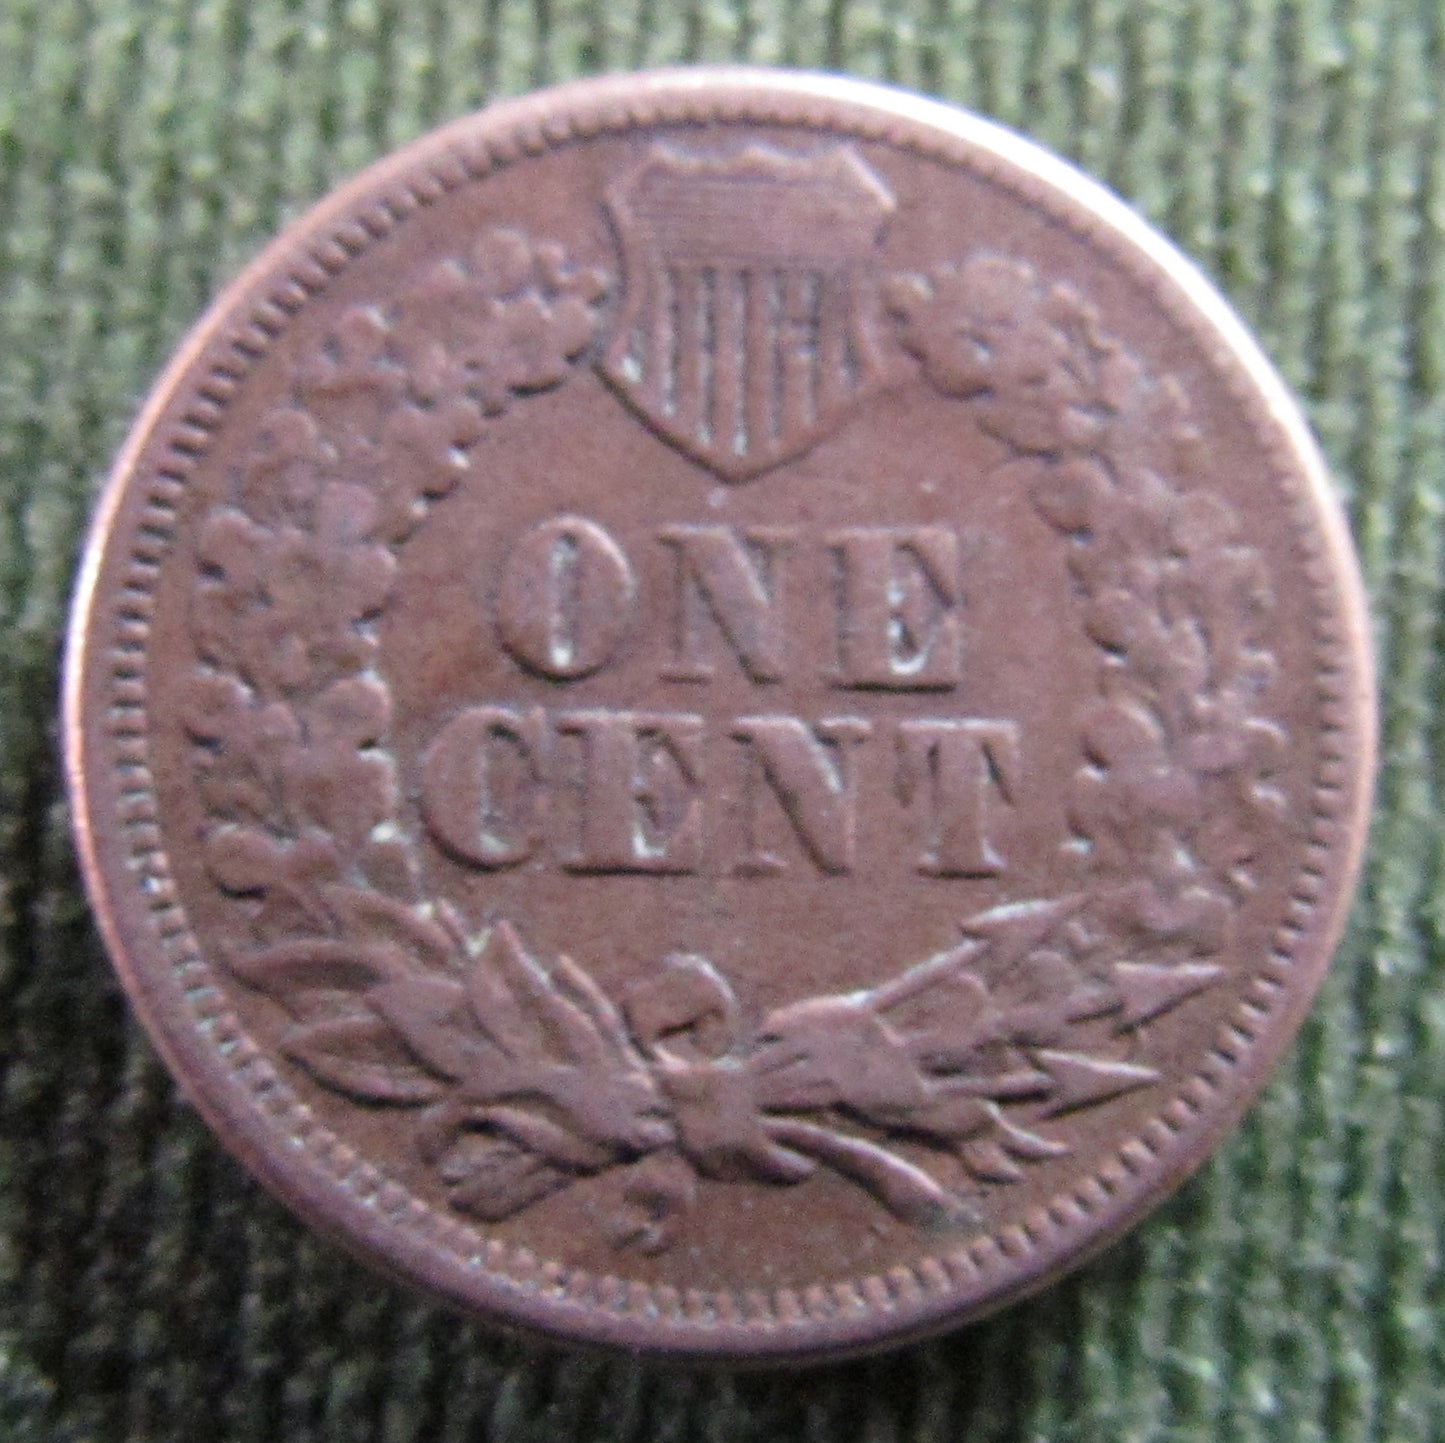 USA American 1860 1 Cent Indian Head Penny Coin - Circulated